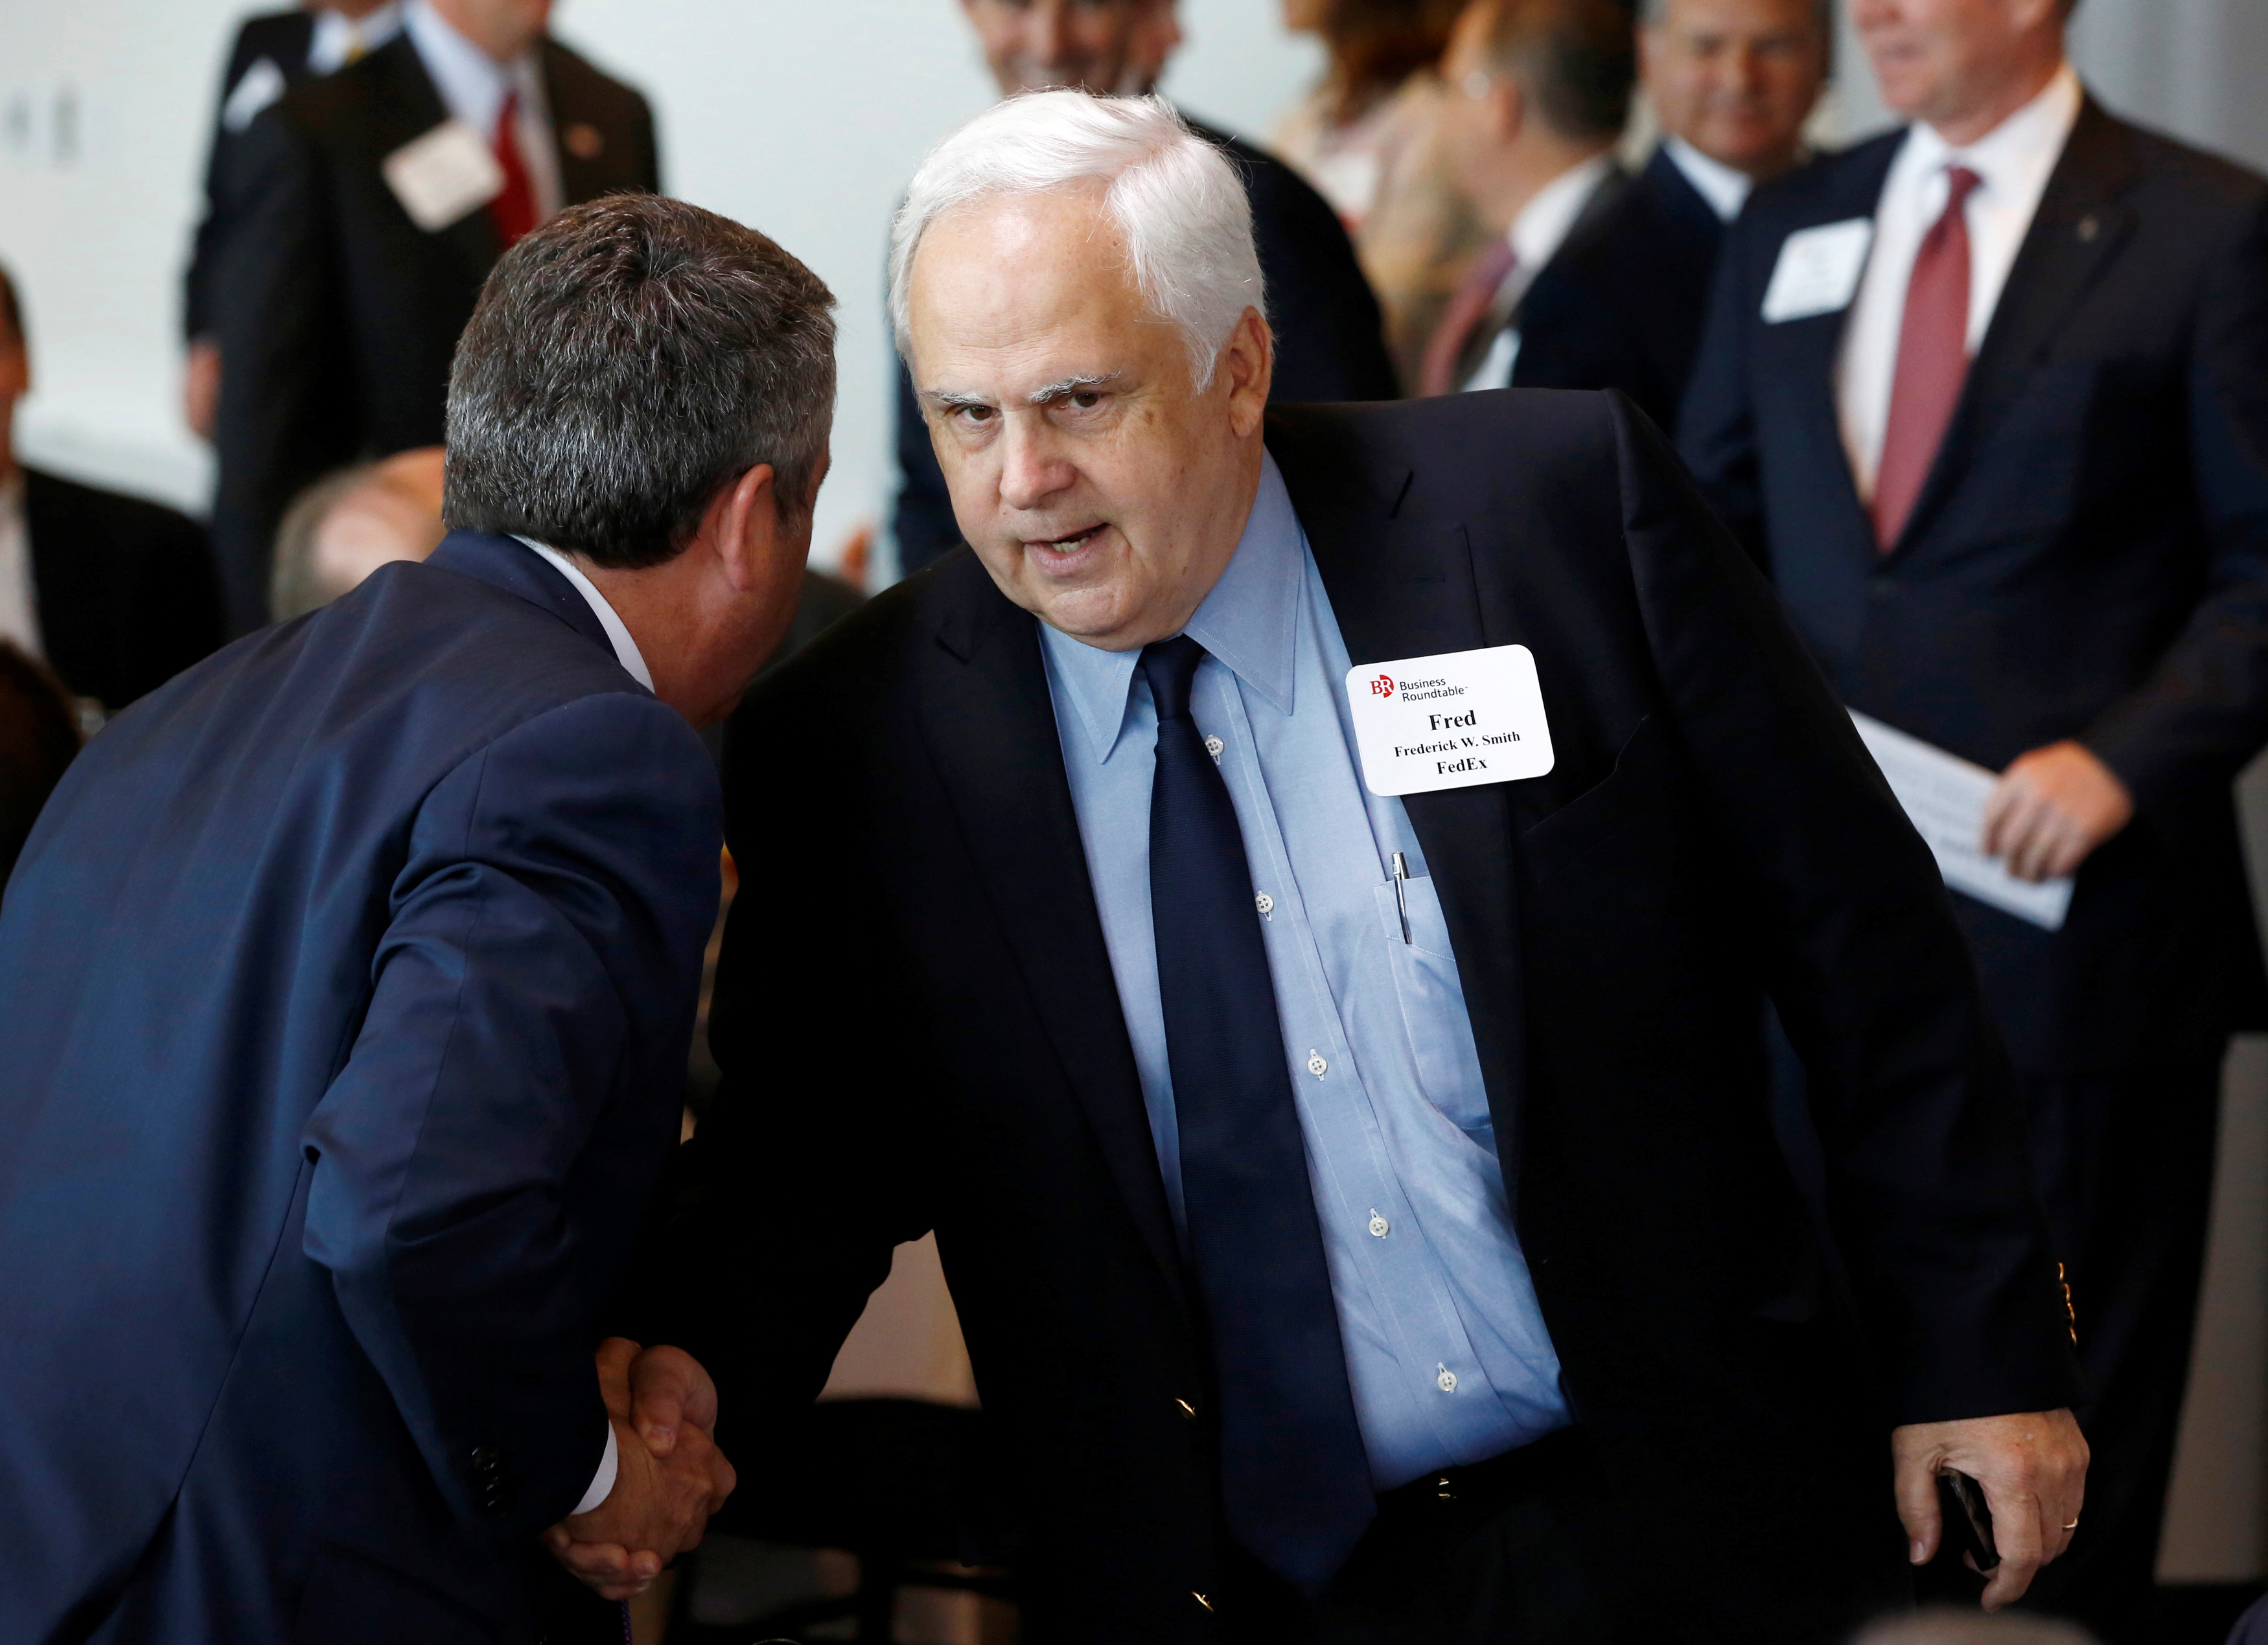 Fedex CEO Fred Smith is pictured at a business roundtable meeting of company leaders and U.S. Republican Presidential candidate Mitt Romney in Washington, June 13, 2012.   REUTERS/Jason Reed